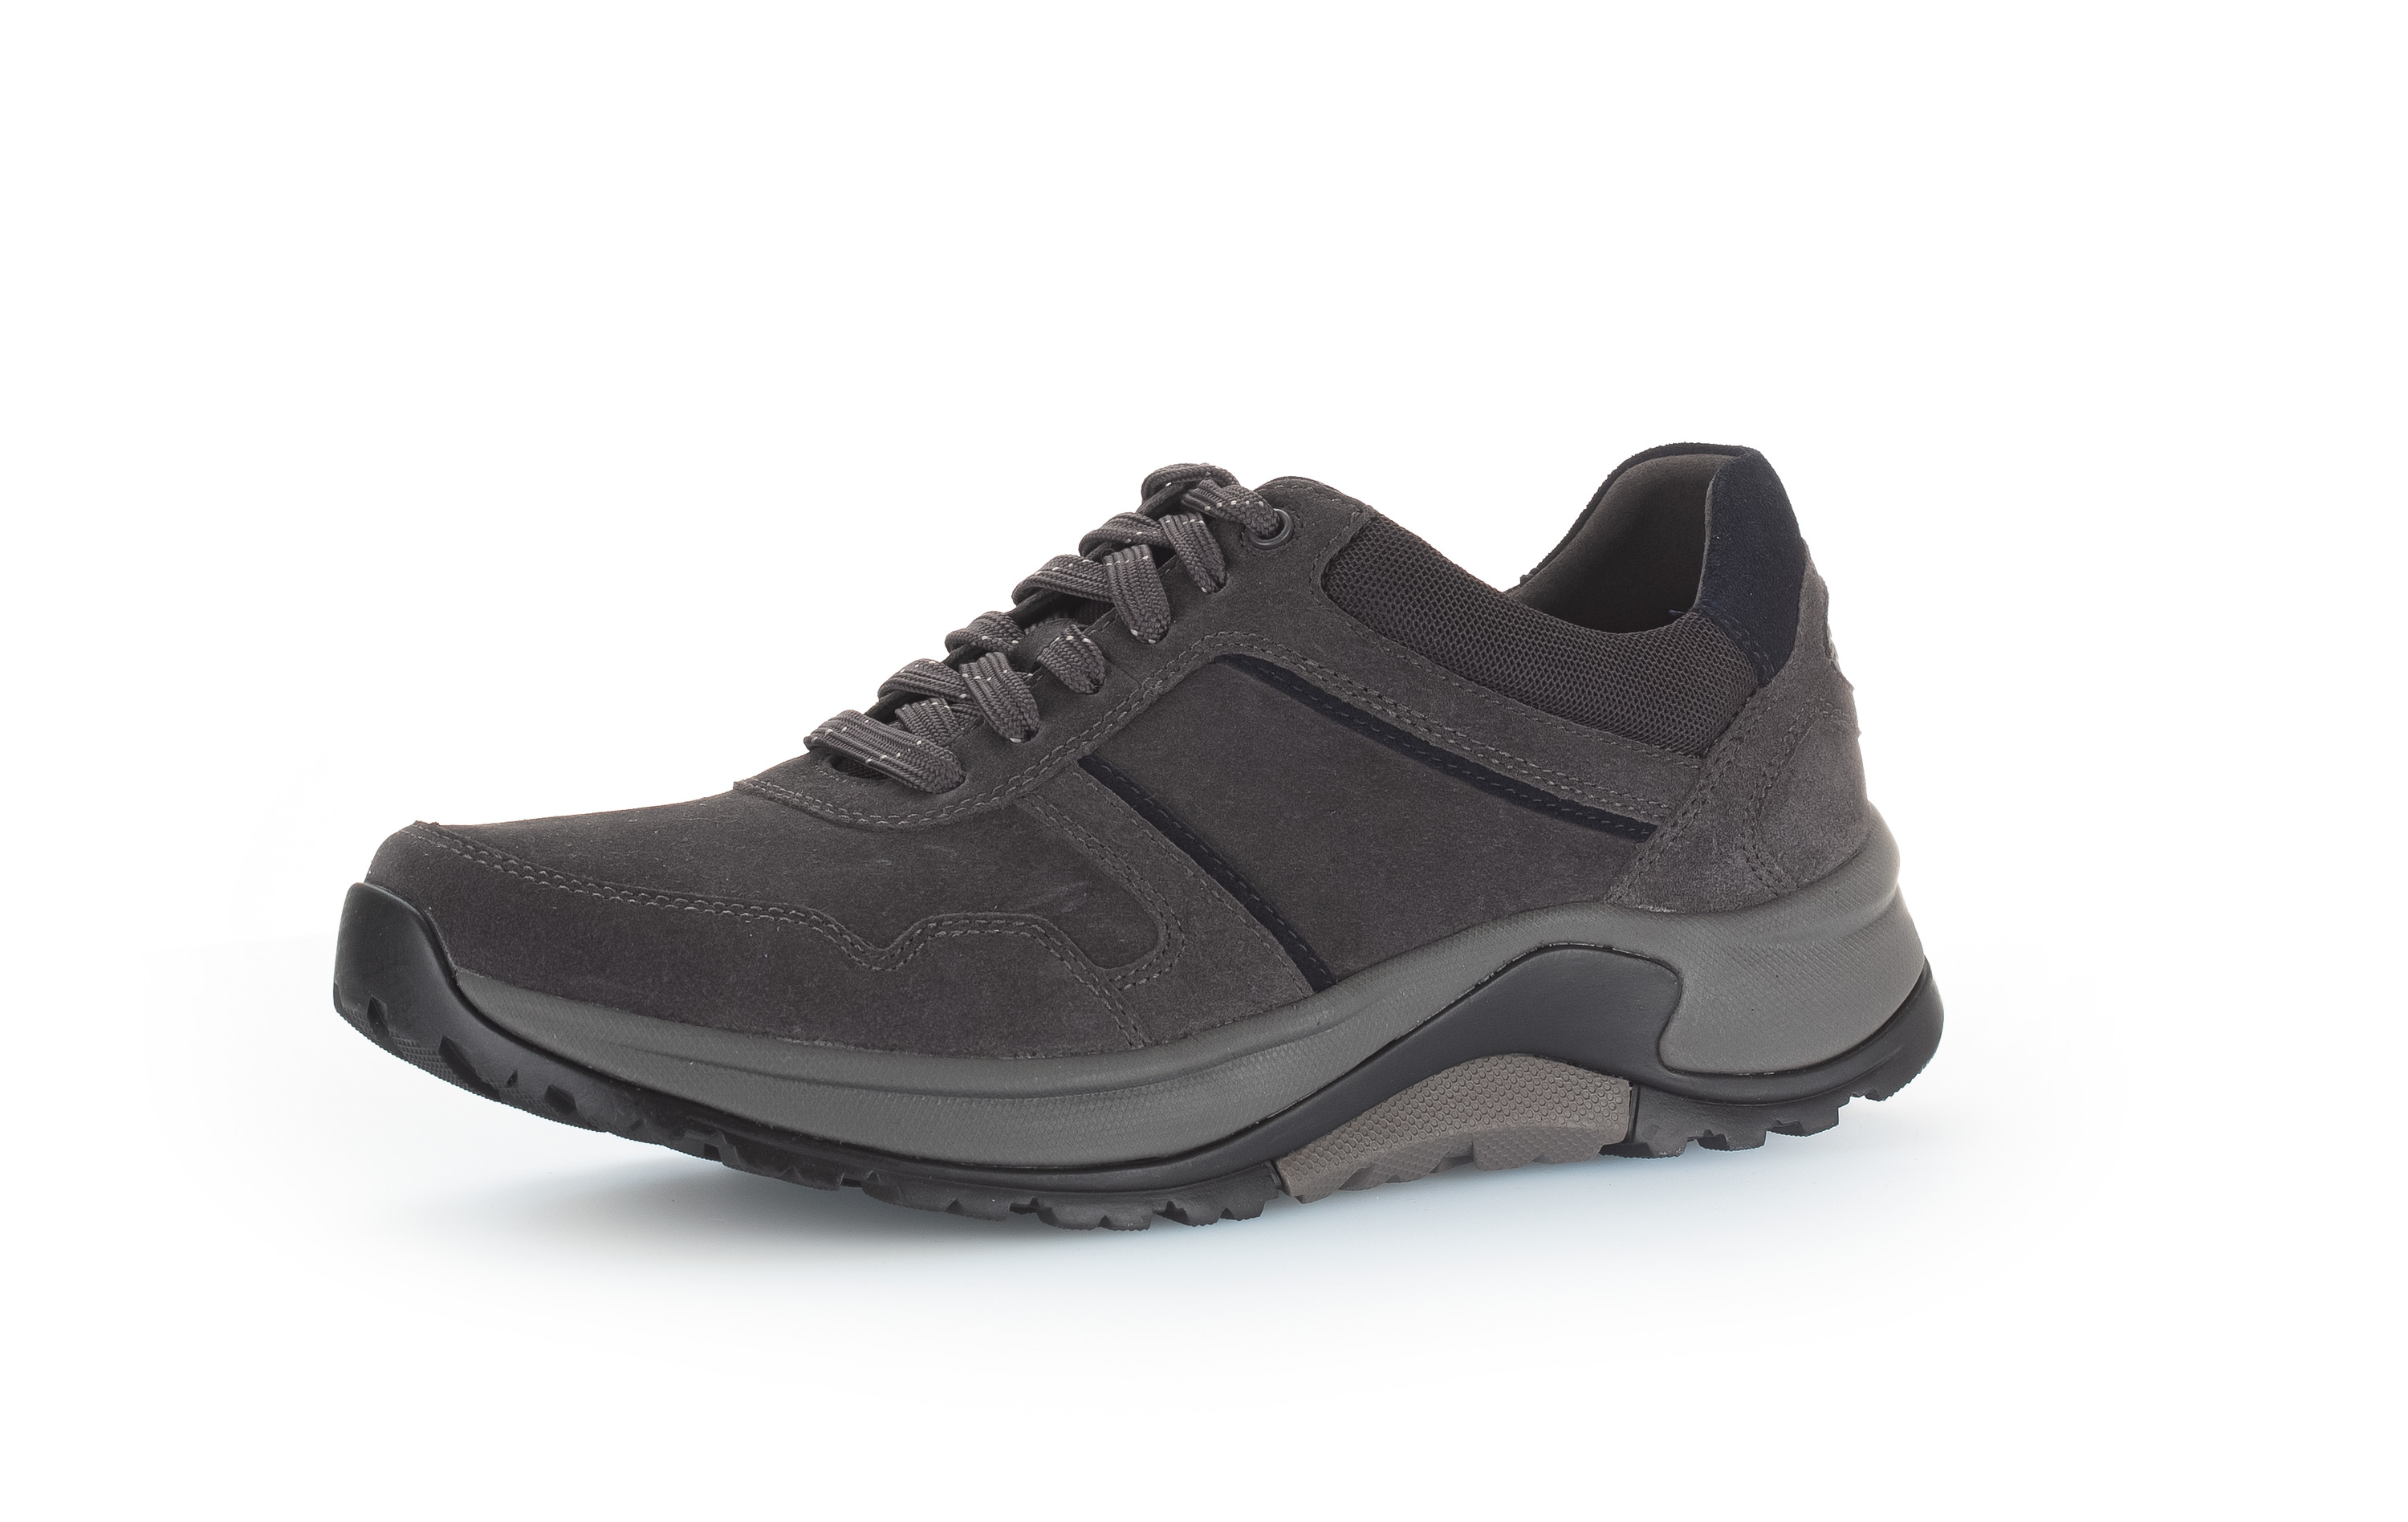 Gabor Shoes Sneaker Low - Grey Leather/Textile